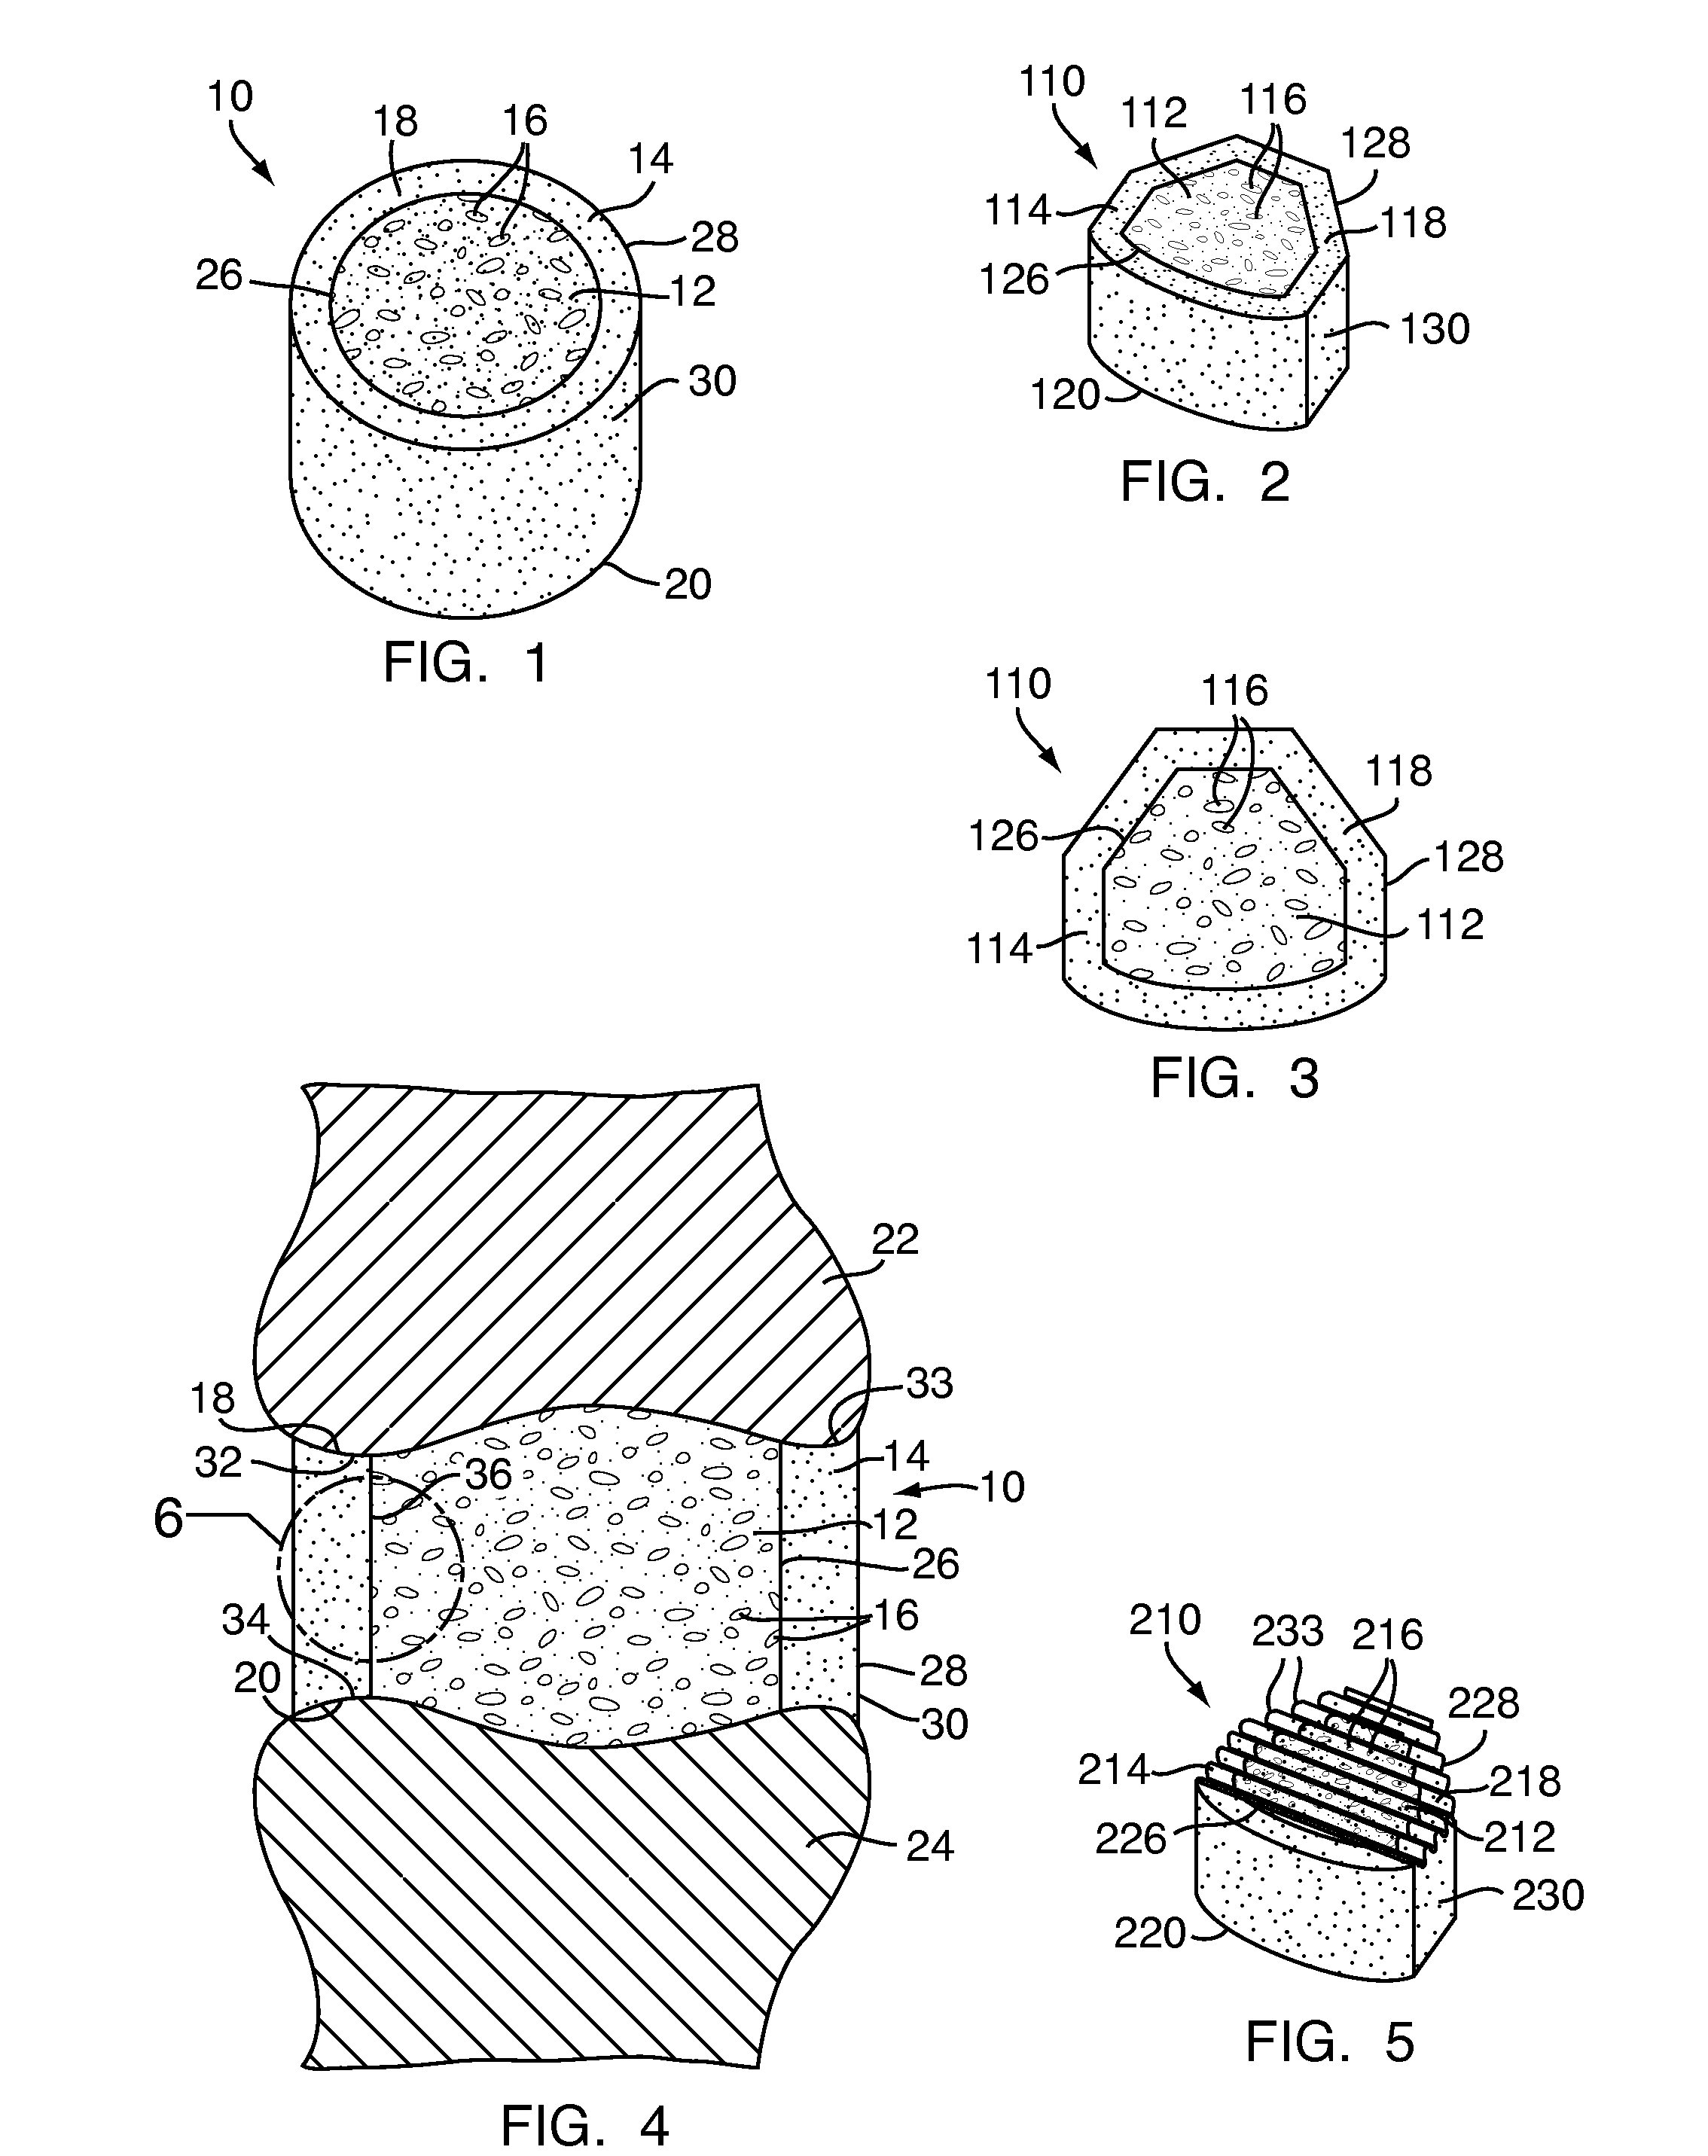 Method for fabricating a multi-density polymeric interbody spacer